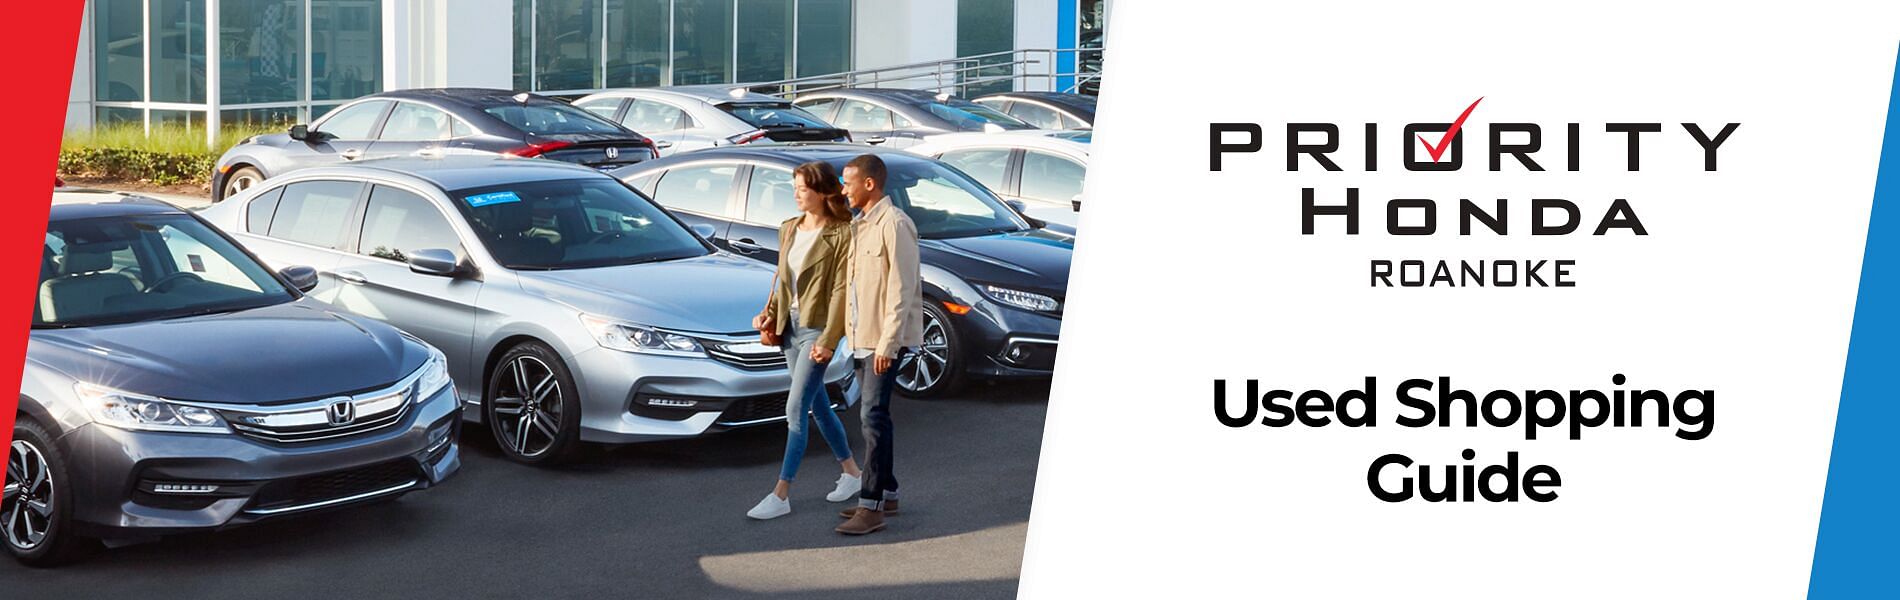 On the right, a couple holding hands walks through a car dealership; on the left, the inscription PRIORITY HONDA ROANOKE Used Shopping Guide on a white background.